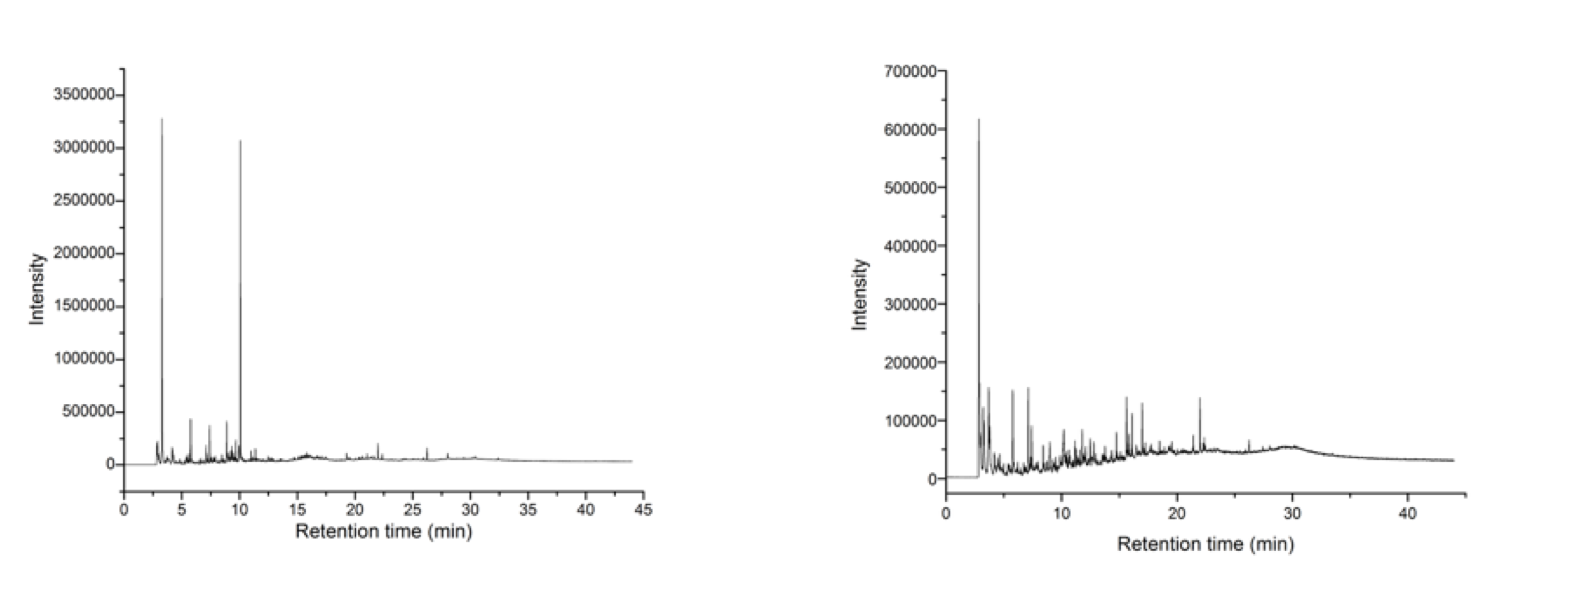  The Py-GC/MS chromatogram produced from the least degraded sample suggested the presence of&nbsp; D-limonene, a solvent used to smooth wax molds and other wax-based sculpting mediums, and to clean the leftover wax off the working surface.  